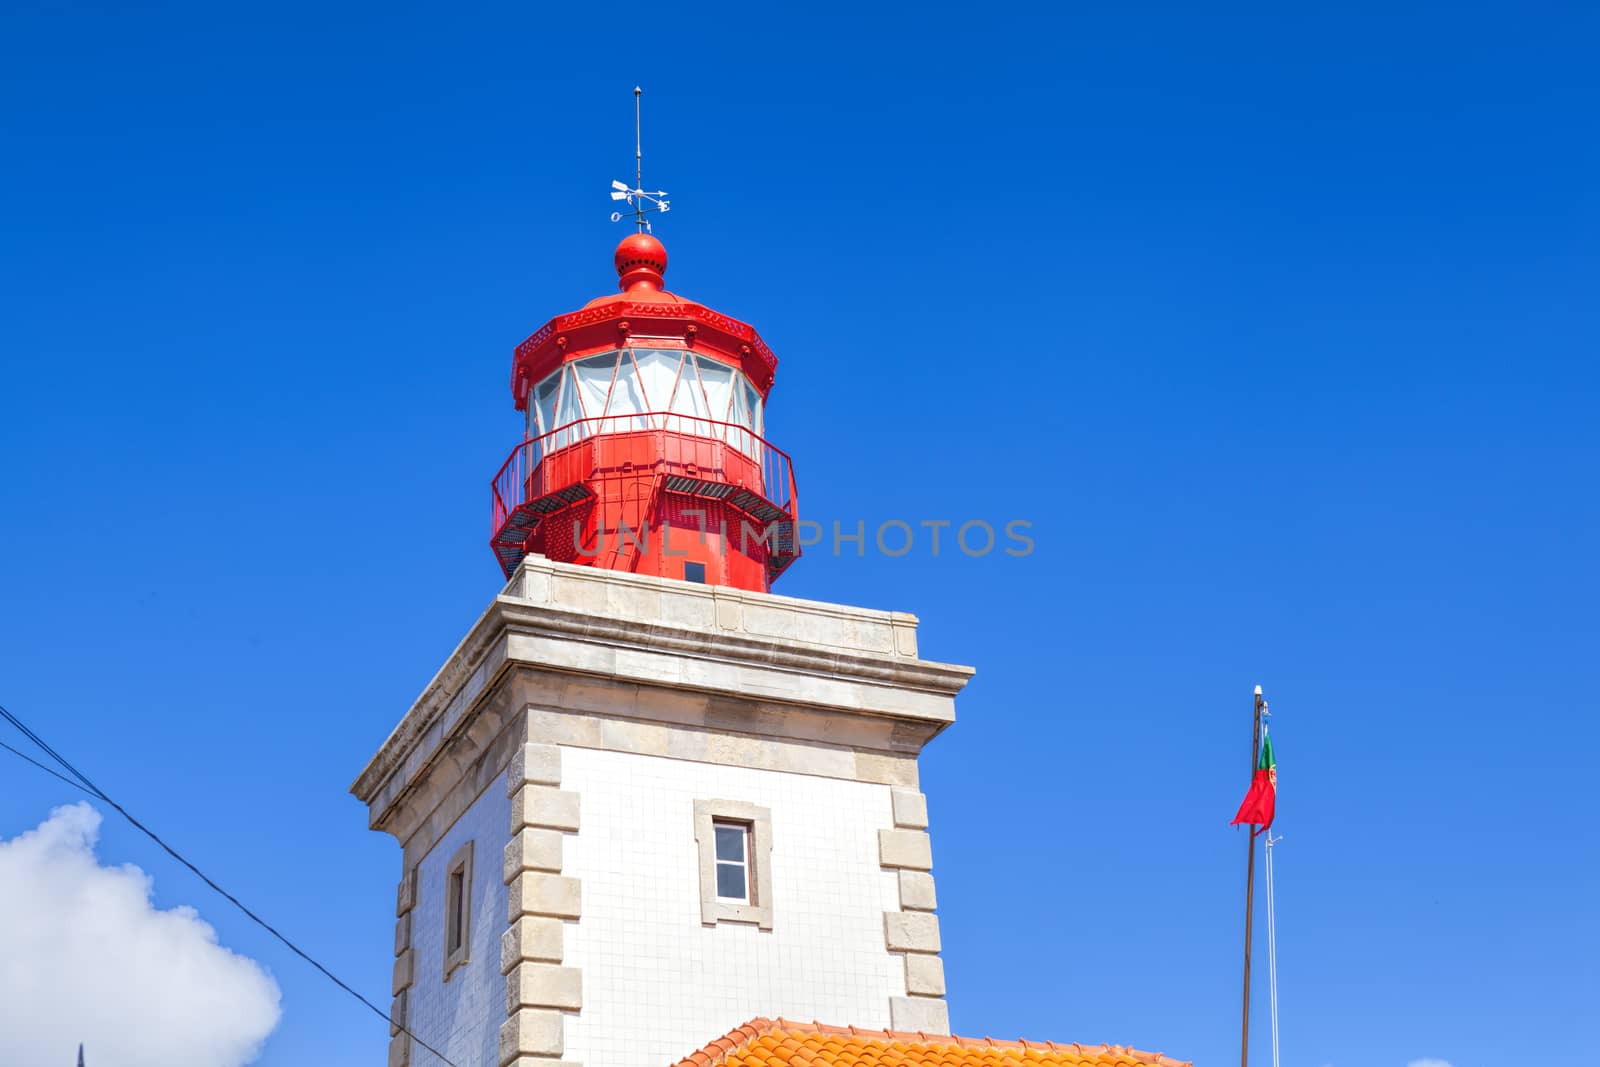 Lighthouse at Cabo da Roca, Portugal, the most west cape of continent